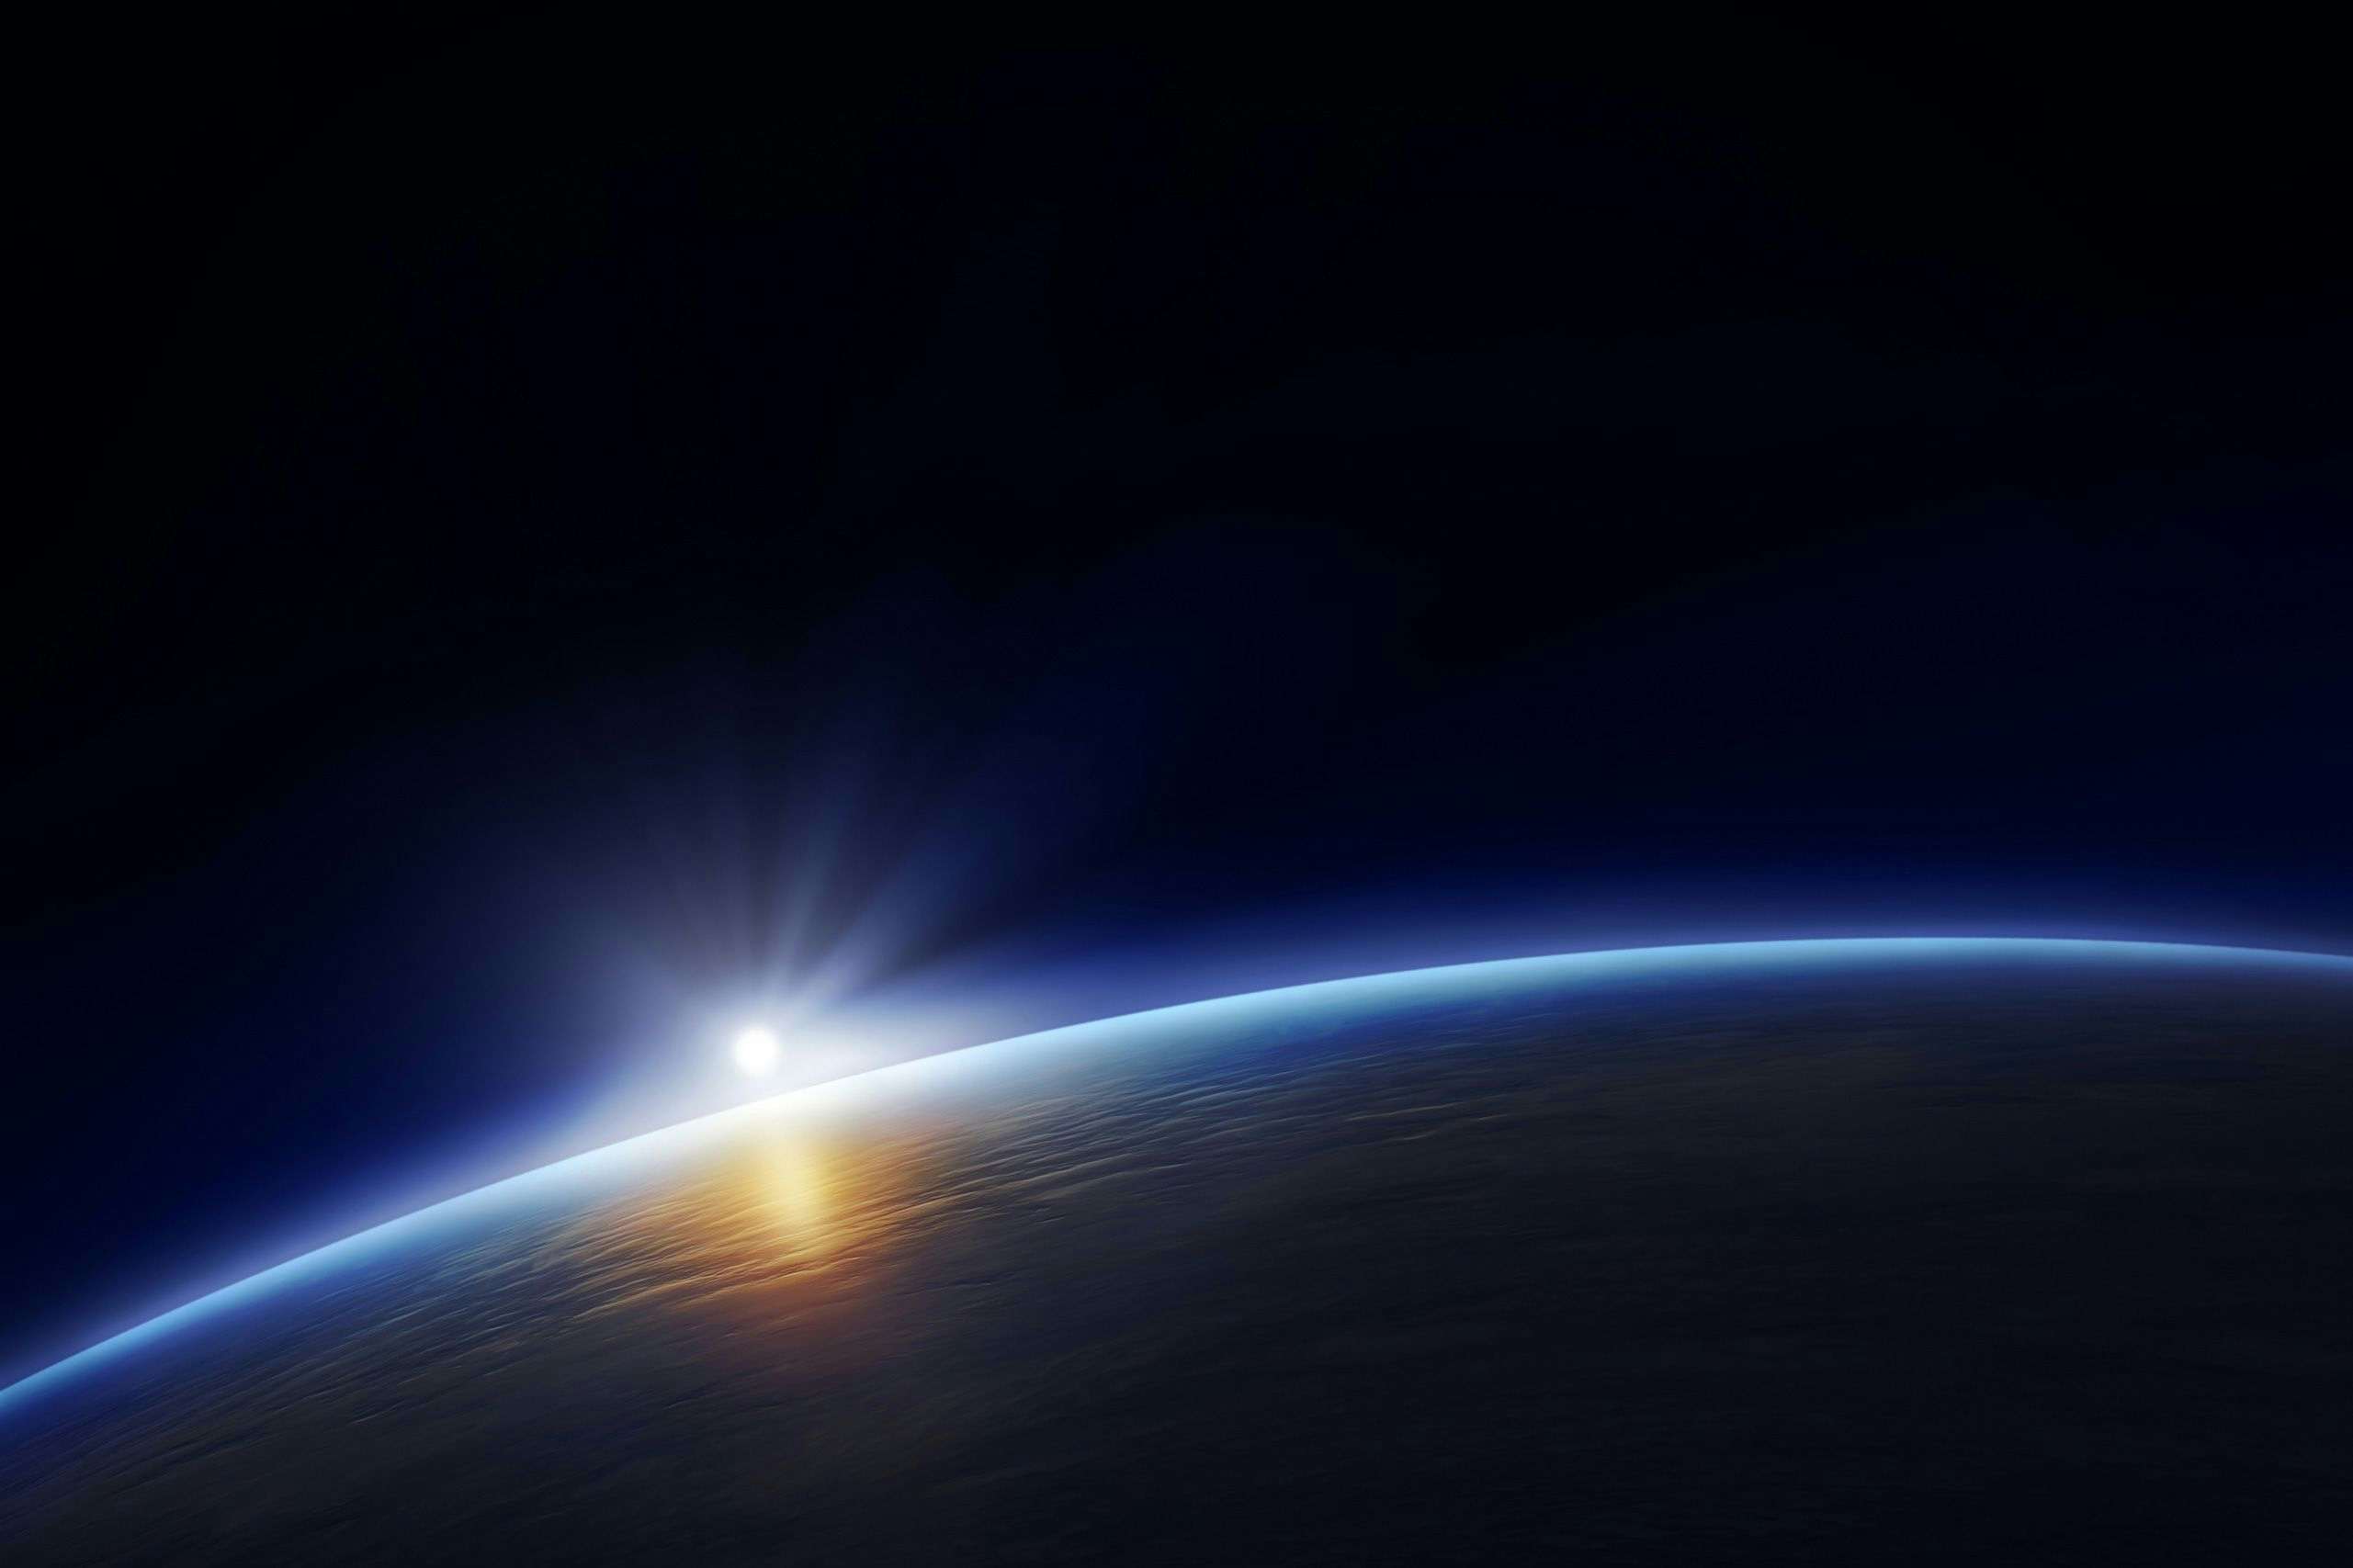 Space view of sun rising over the earth to illustrate my daily logo design challenge